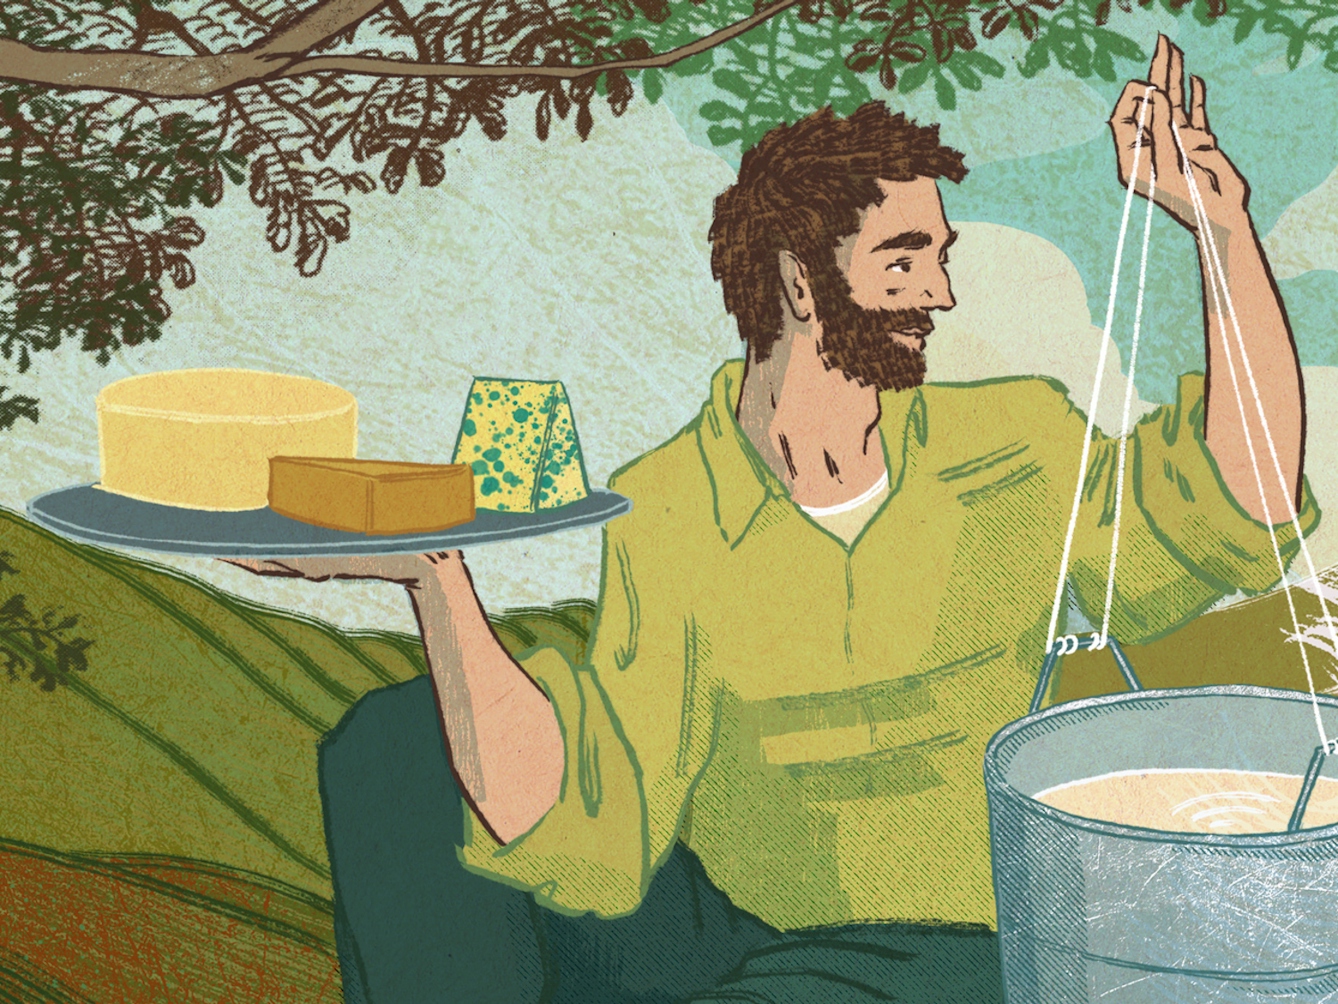 A digital illustration of a farmer in a field holding dairy products. The farmer is a white male with a dark beard, he is sat on the ground under the branches of a large tree. In his right hand is a large plate with various types of cheese, in his left hand is a pail full of milk. In the background we see rolling hills.